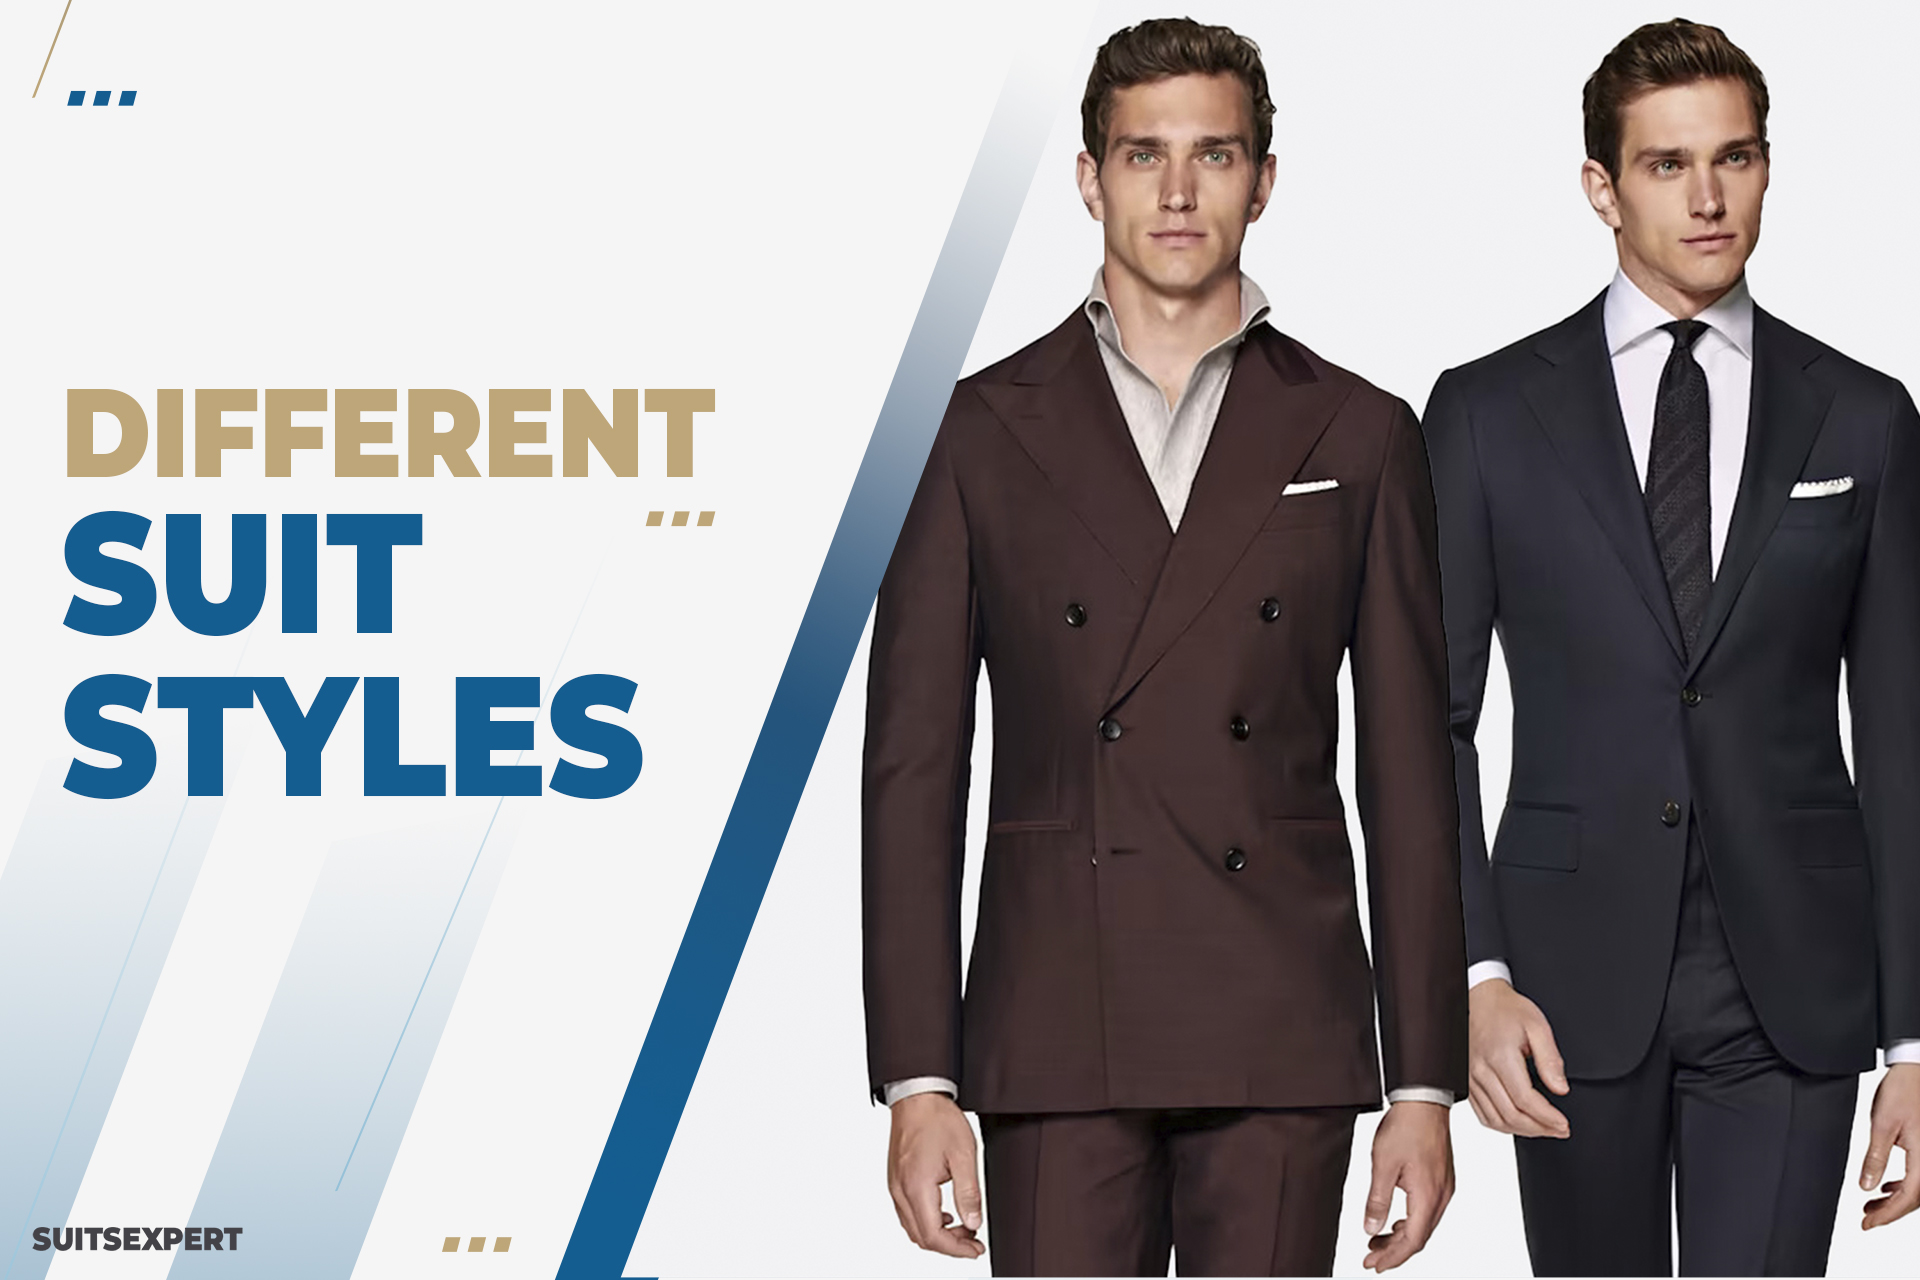 Men'S Suit Styles: Types And Differences - Suits Expert